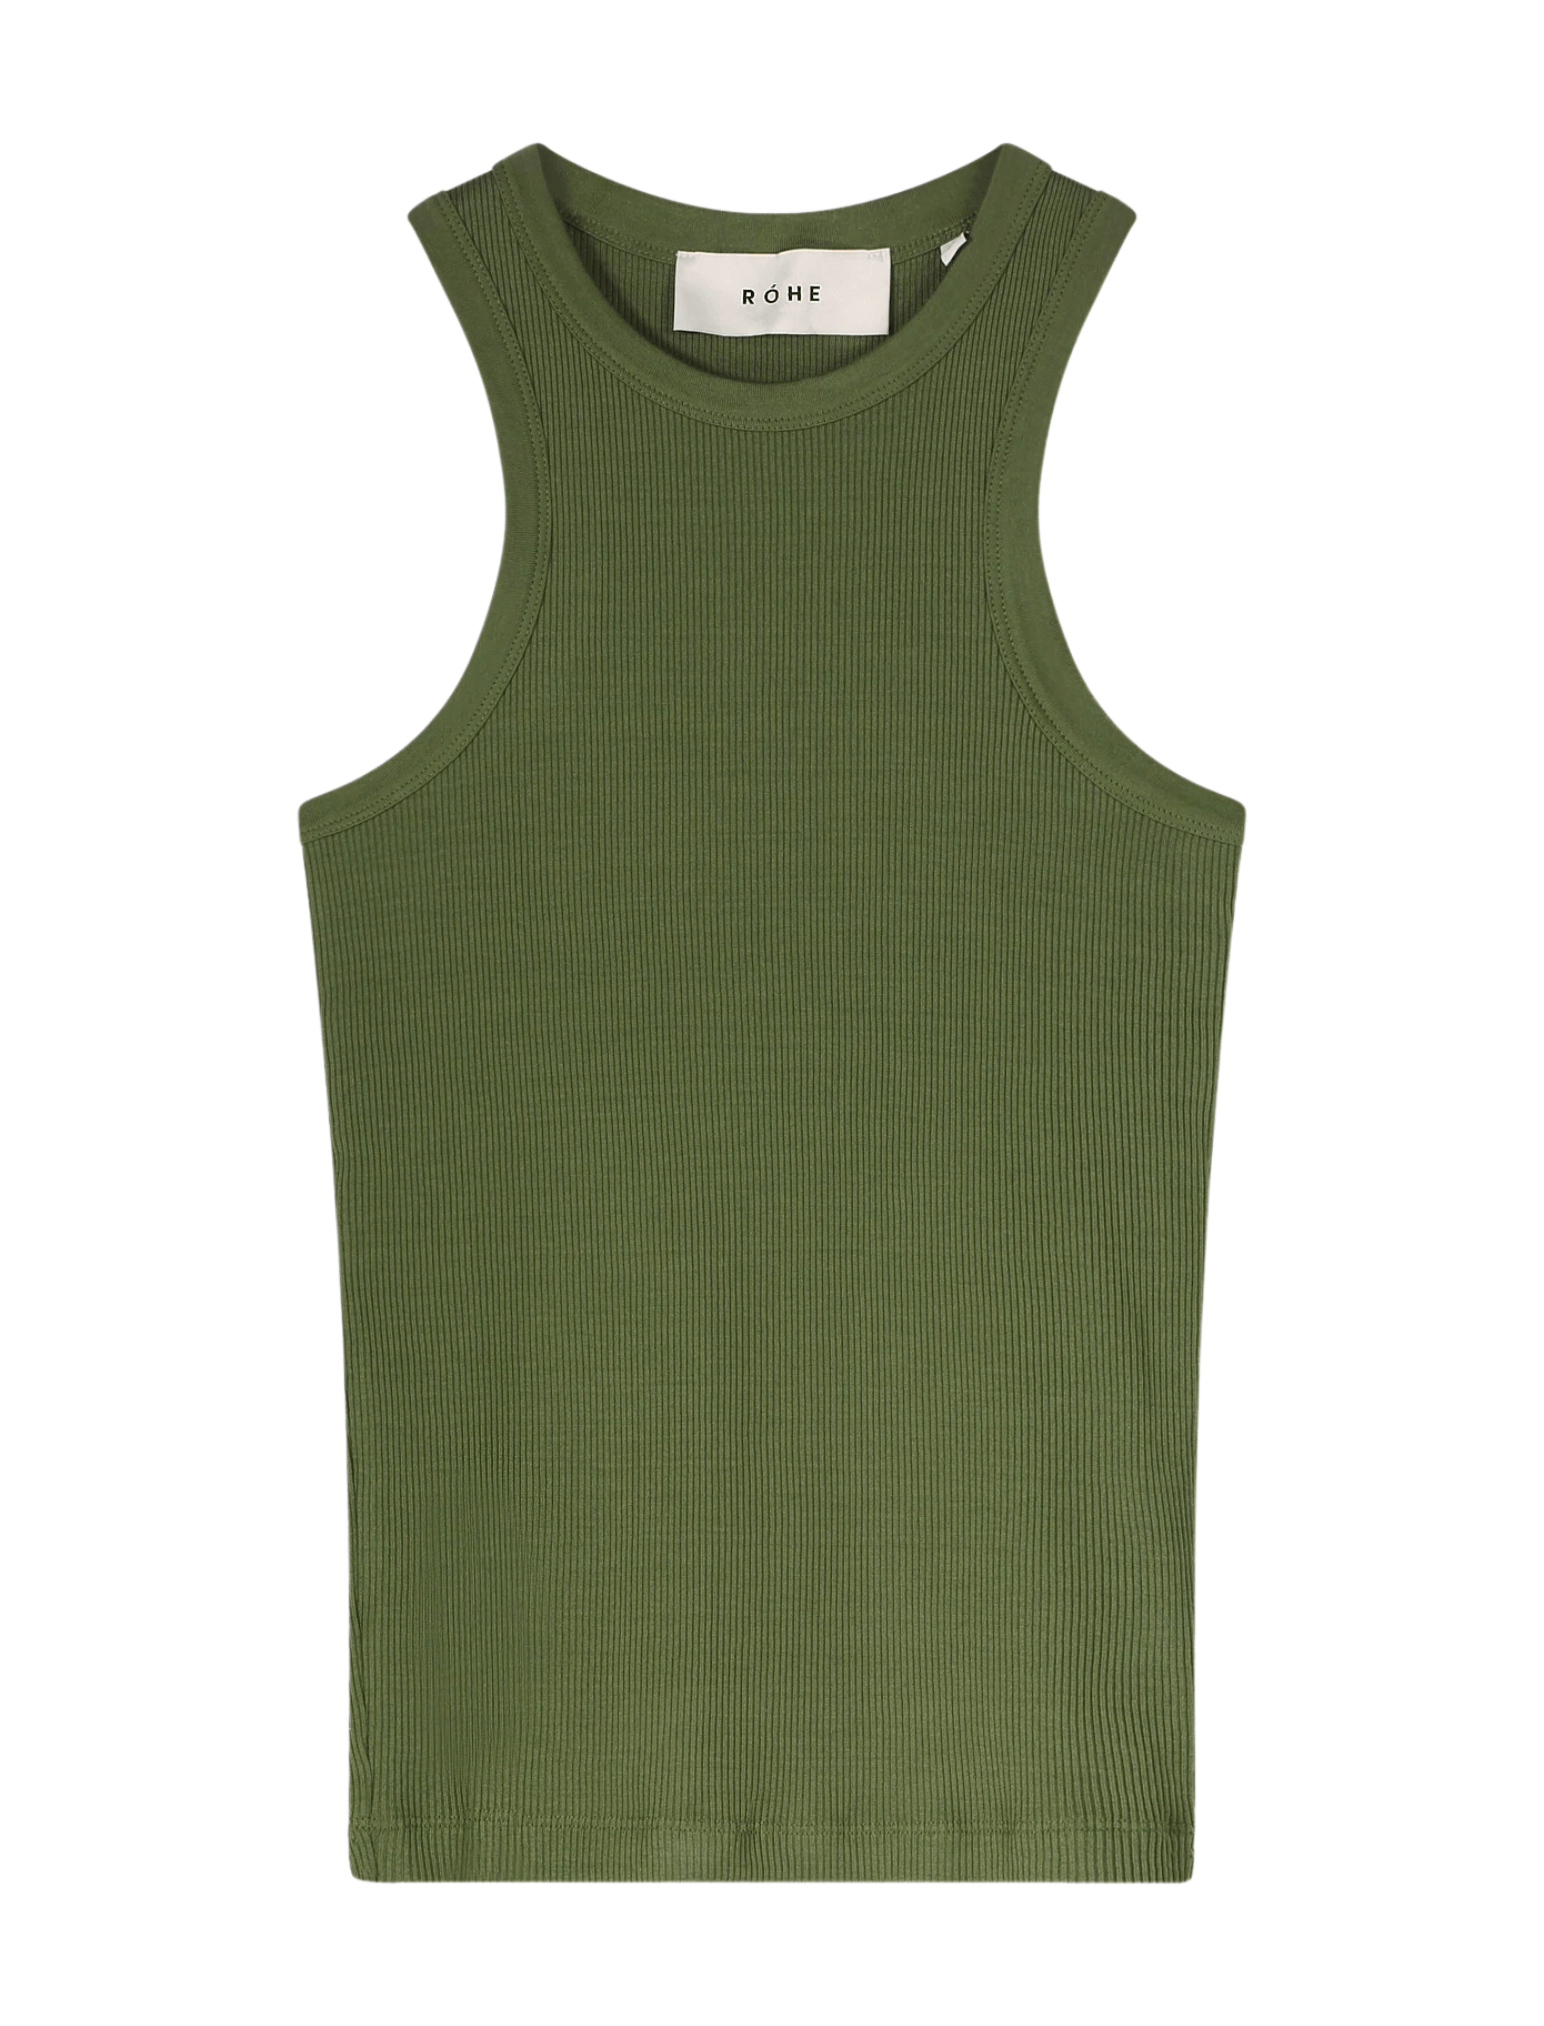 Ribbed Tank with My Other Ride Vintage Inspired Graphic